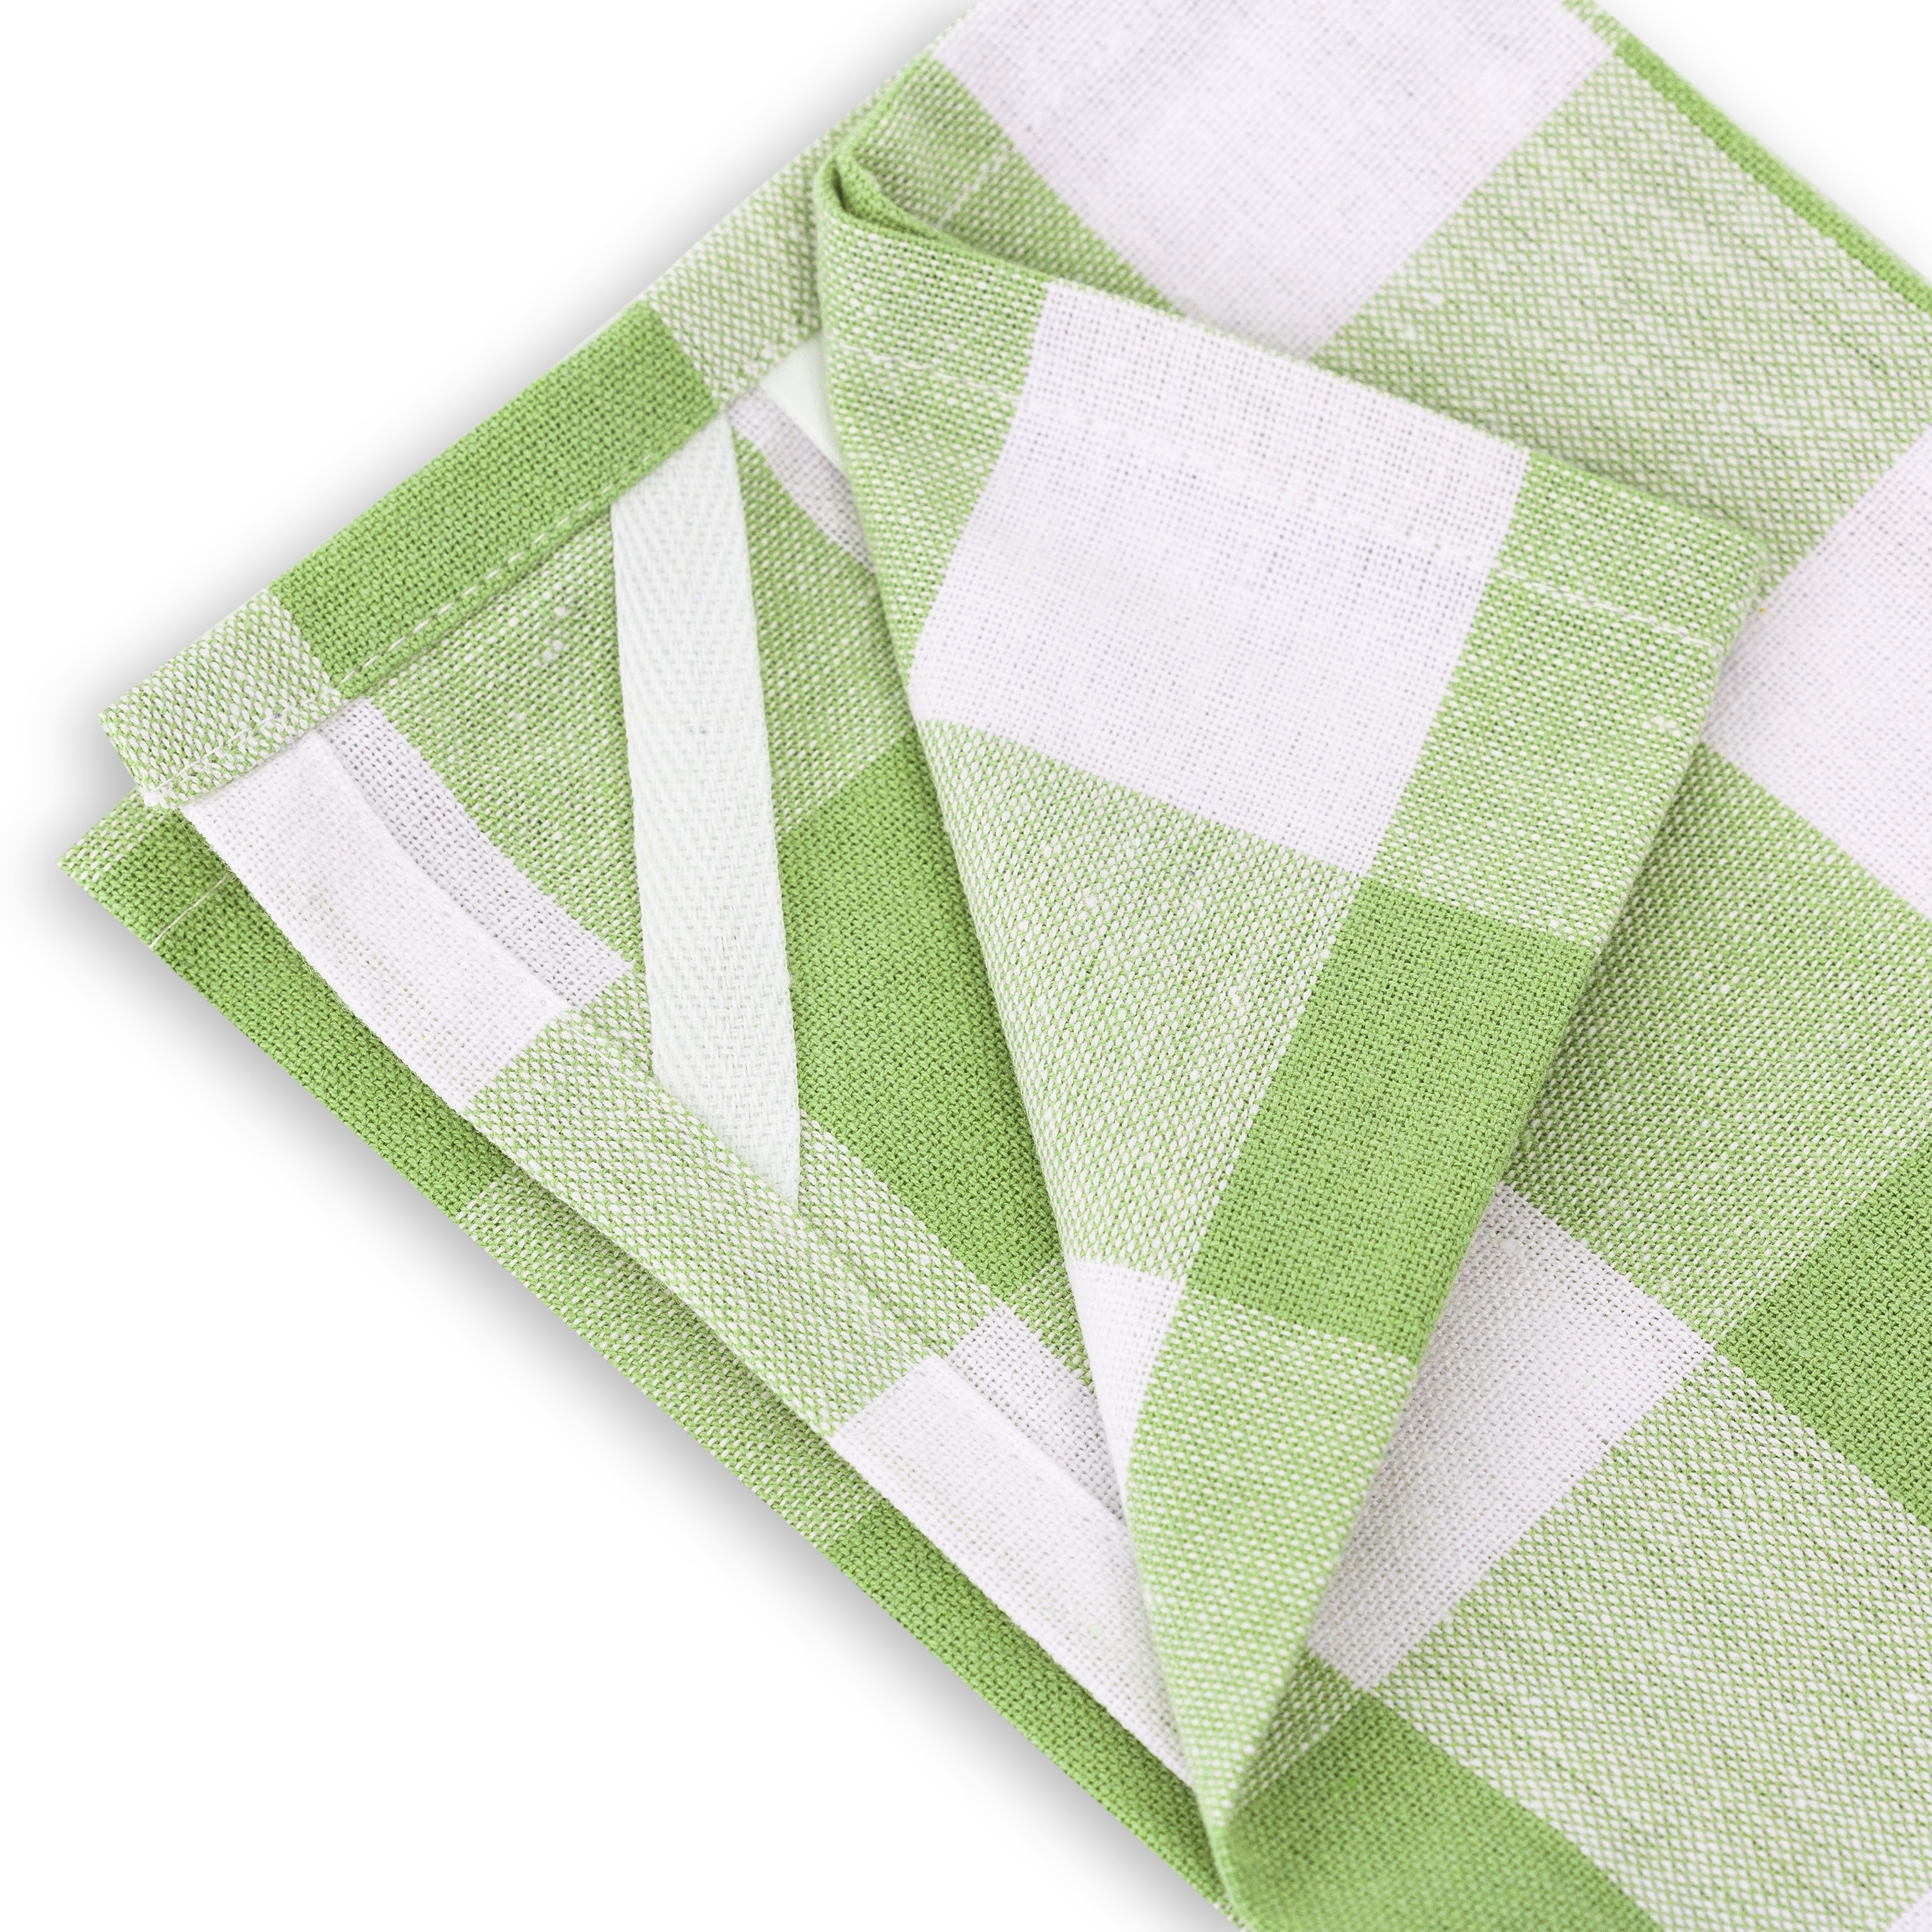 https://ak1.ostkcdn.com/images/products/is/images/direct/547570f80b5a11c46cf0b02d503e92a5391e0ff4/Fabstyles-Country-Check-Cotton-Kitchen-Towel-Set-of-4.jpg